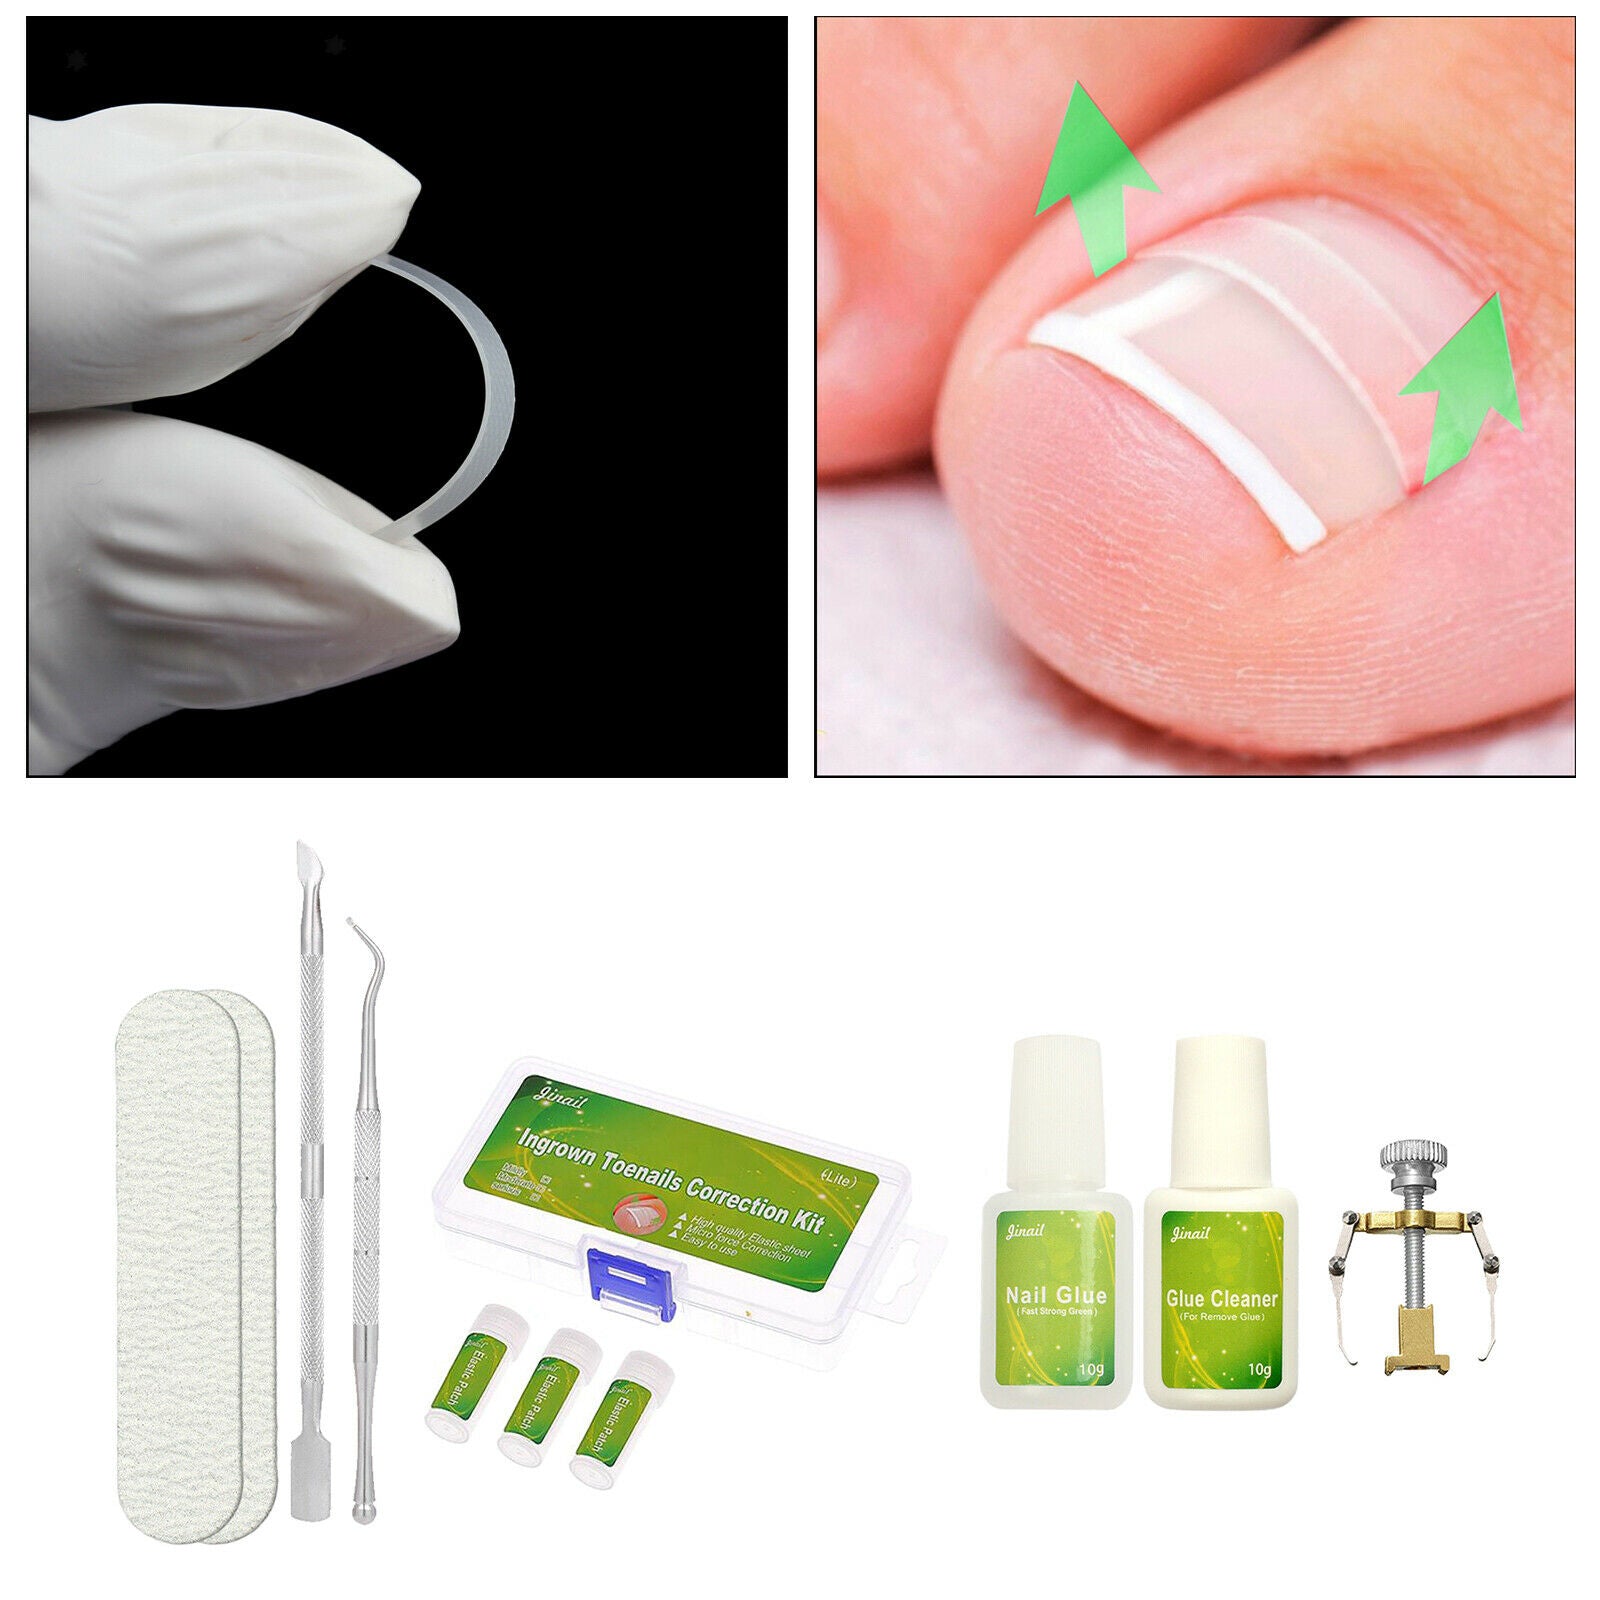 Foot Care Elastic Pedicure Patch with GlueIngrown Nail Straightening